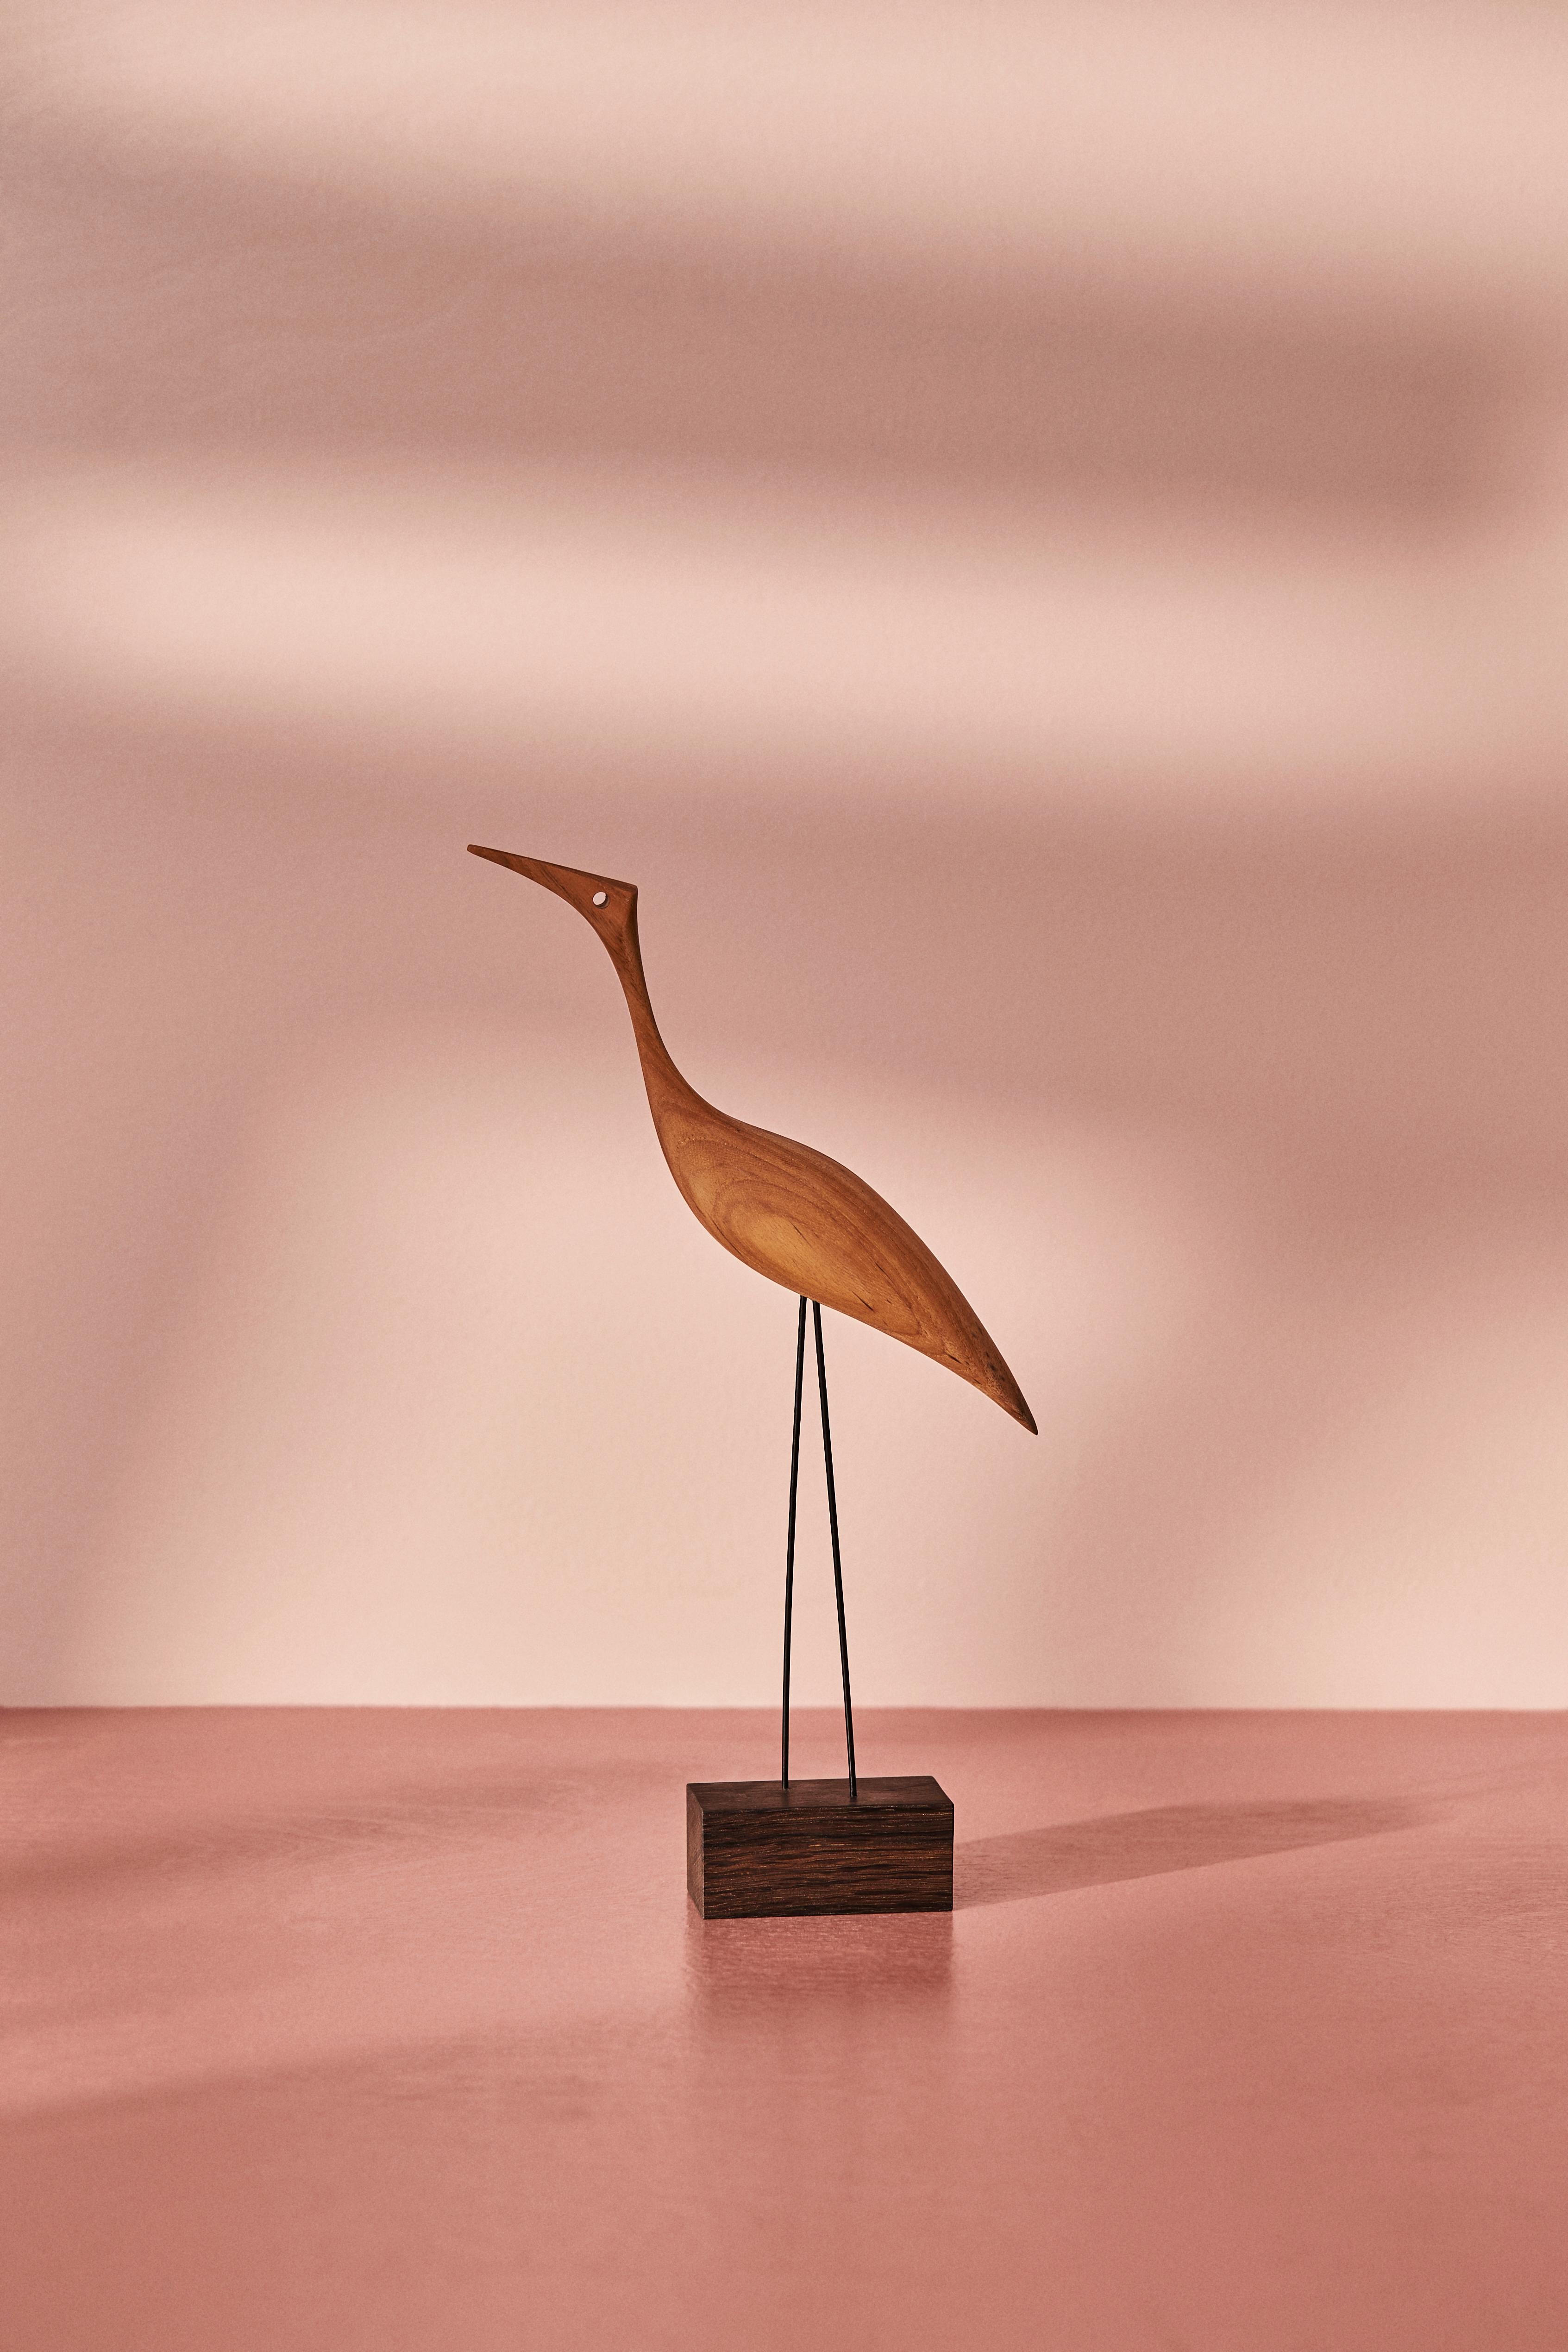 Charming teak birds with beaks and great personality. Manufactured in Denmark and designed by the internationally renowned designer, Svend Aage Holm-Sørensen, who was particularly famous for his lamp designs in the 1950s. Beak birds brings a smile